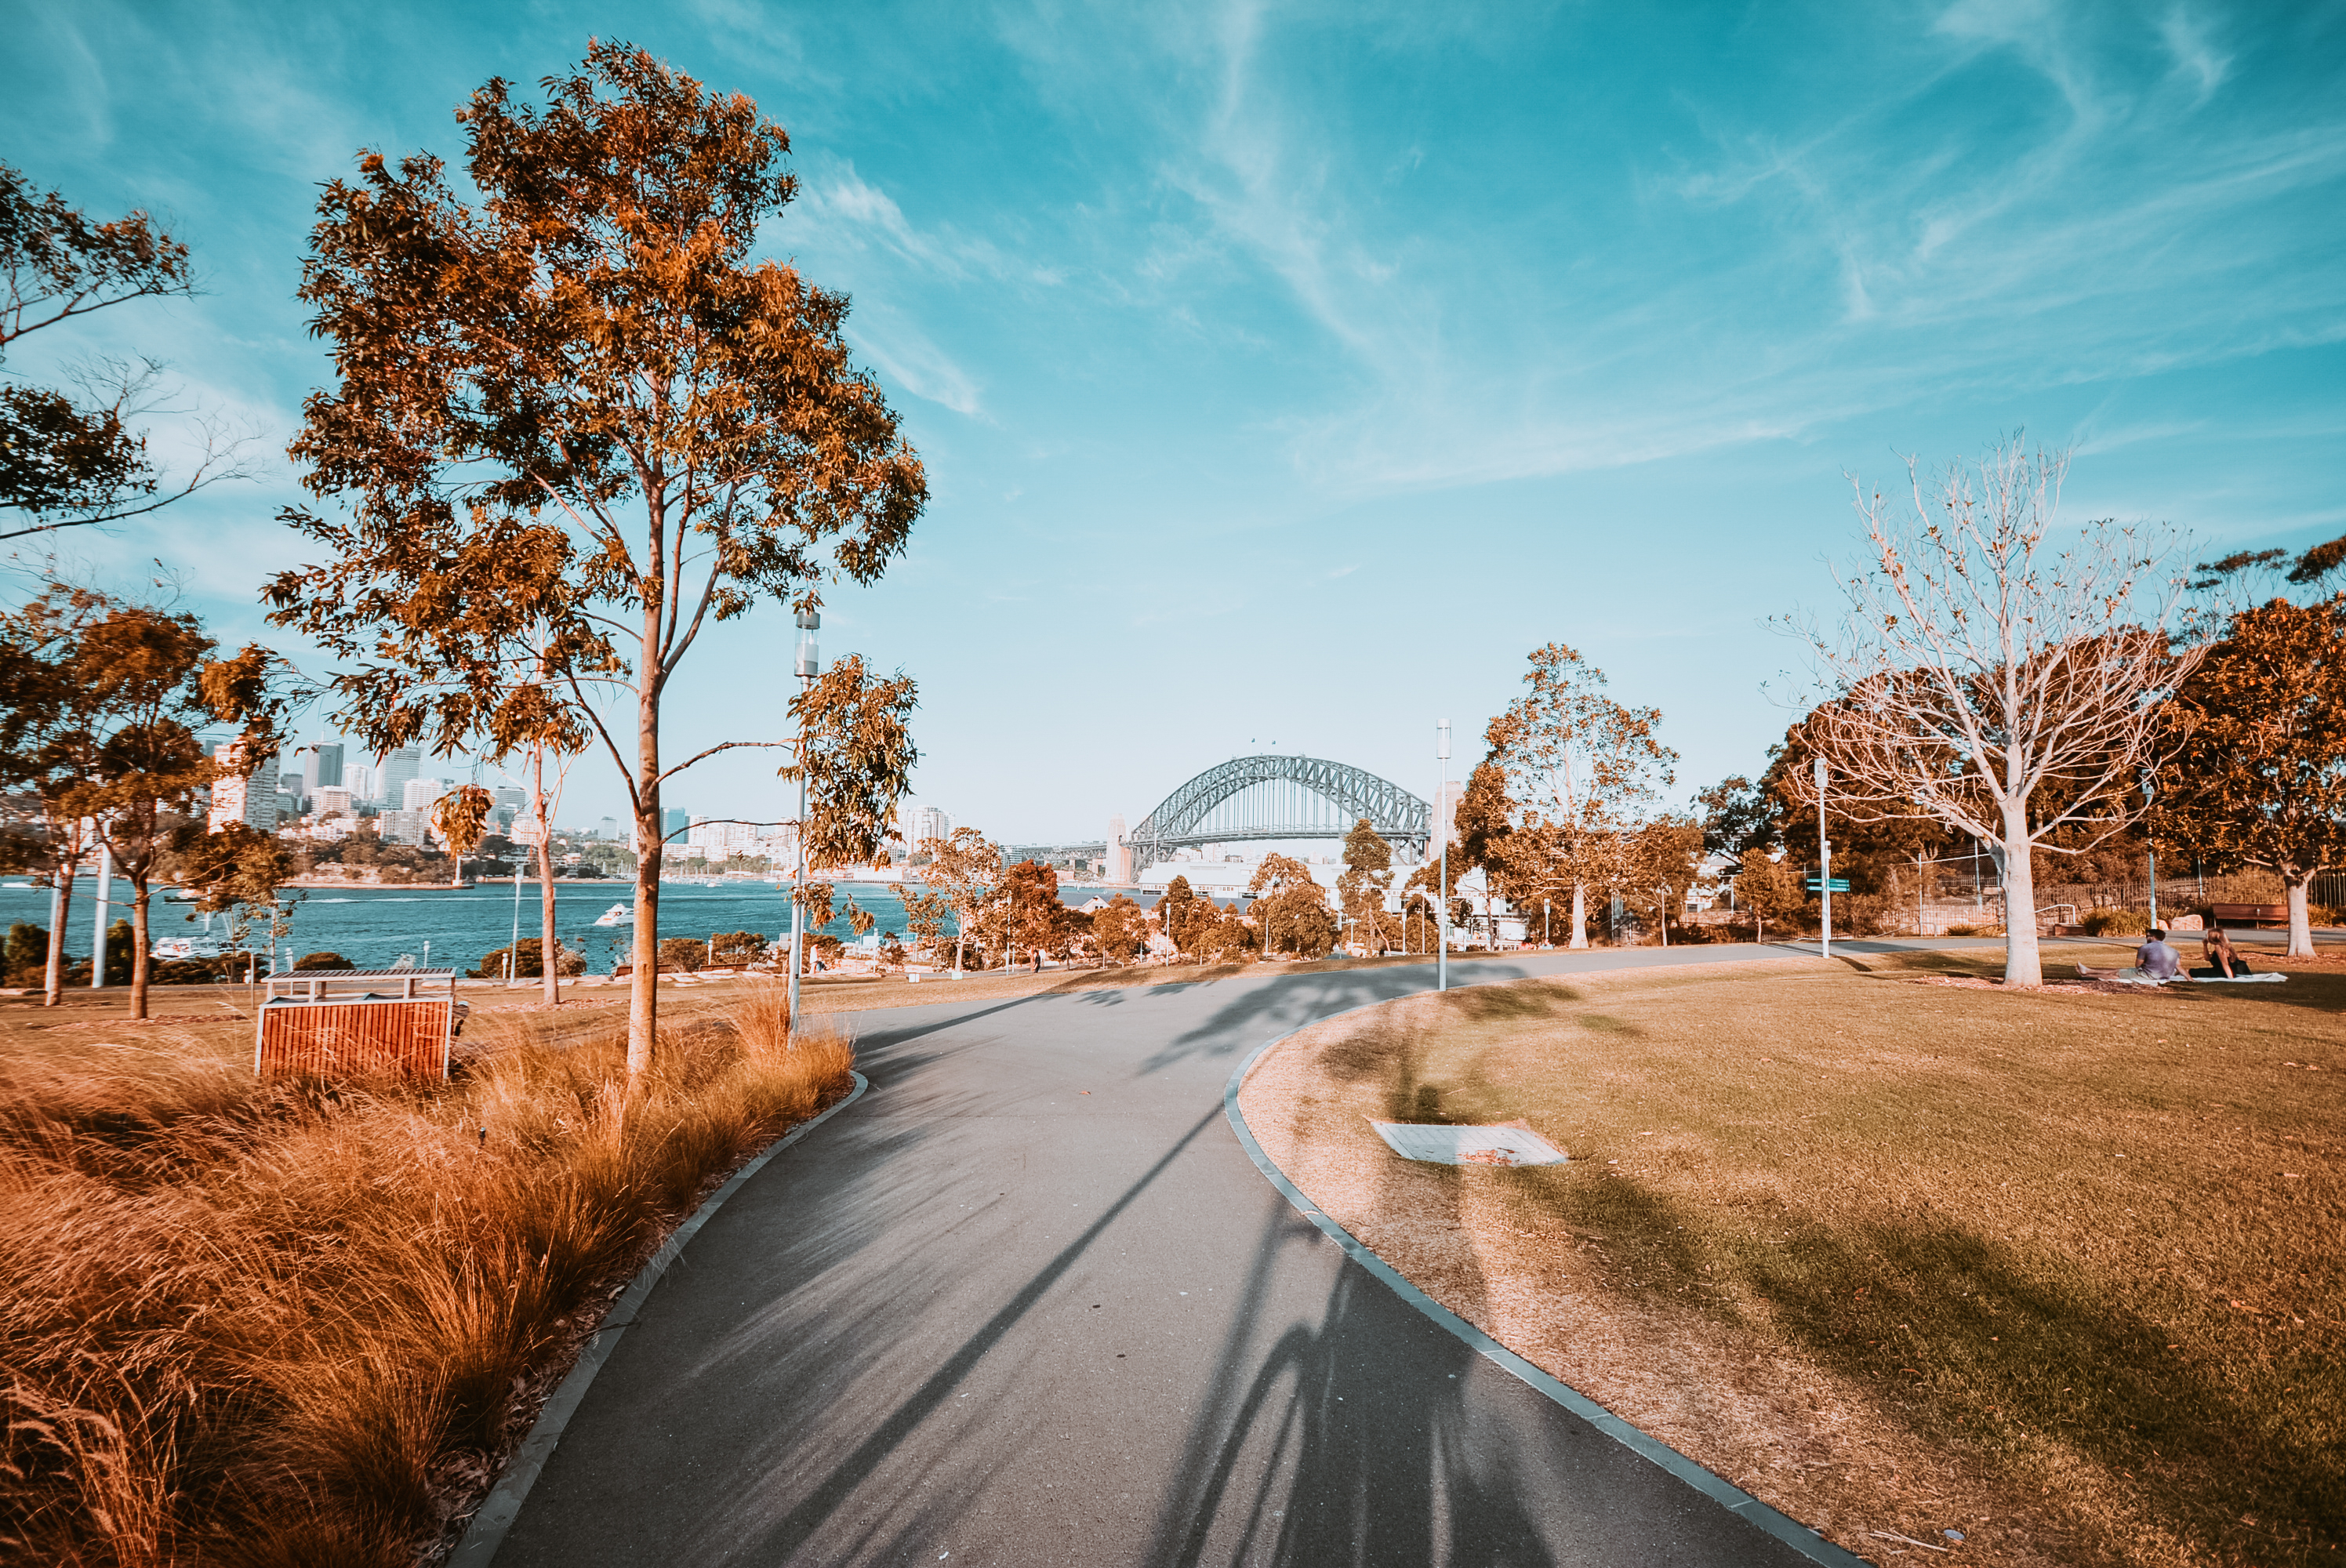 The highly instagrammable Barangaroo Reserve